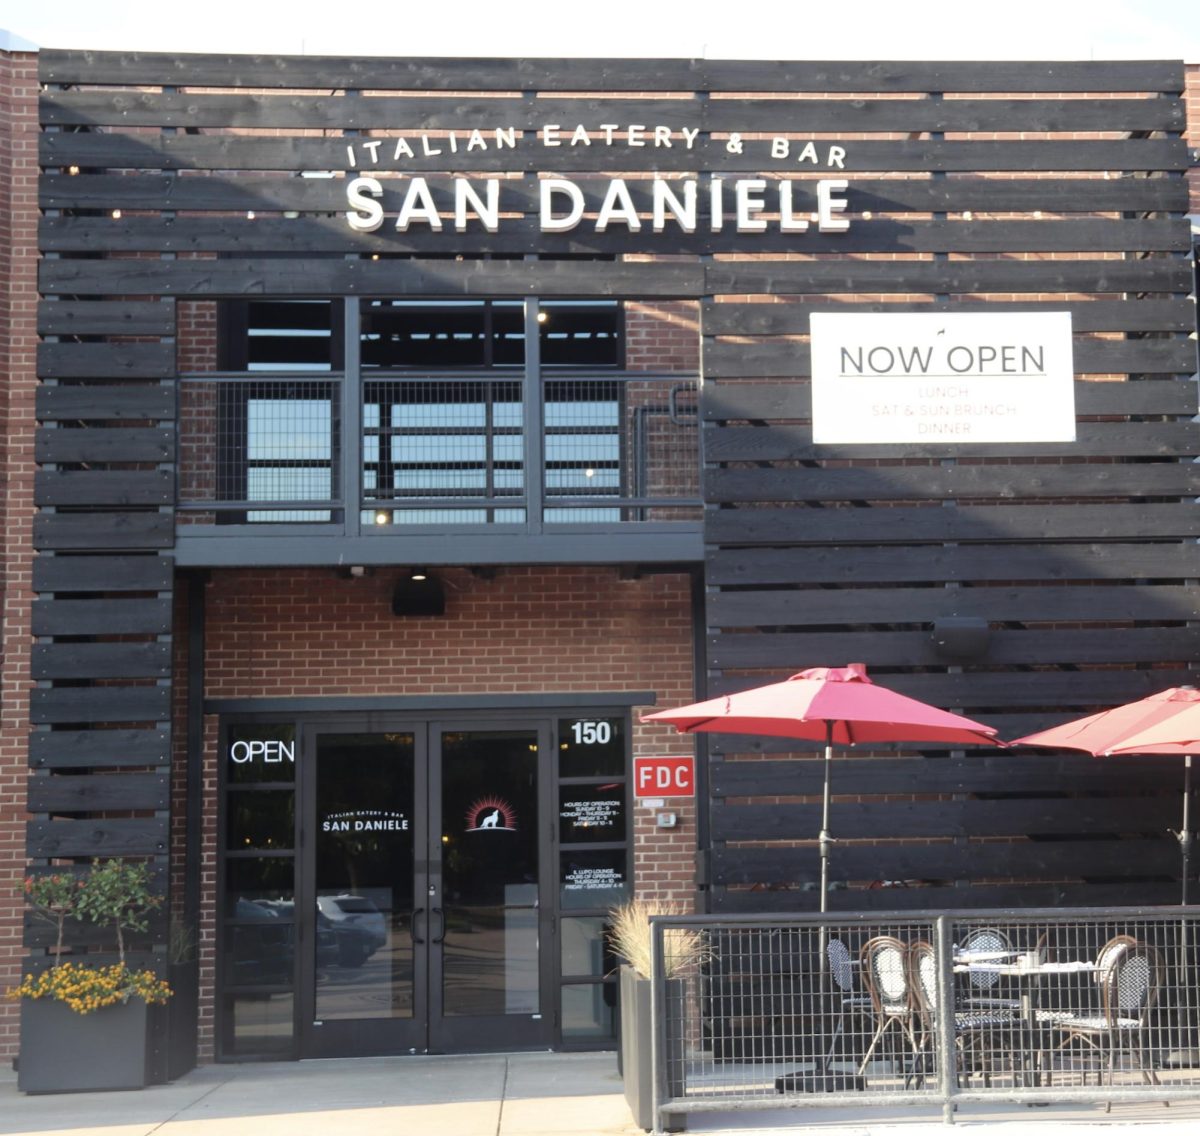 New+restaurant+San+Daniele+provides+both+indoor+and+outdoor+seating+to+its+customers.+San+Daniele+opened+in+Coppell+on+Aug.+28%2C+giving+a+taste+of+Italy+to+Coppell+residents.+%28Ishana+Sharma%29